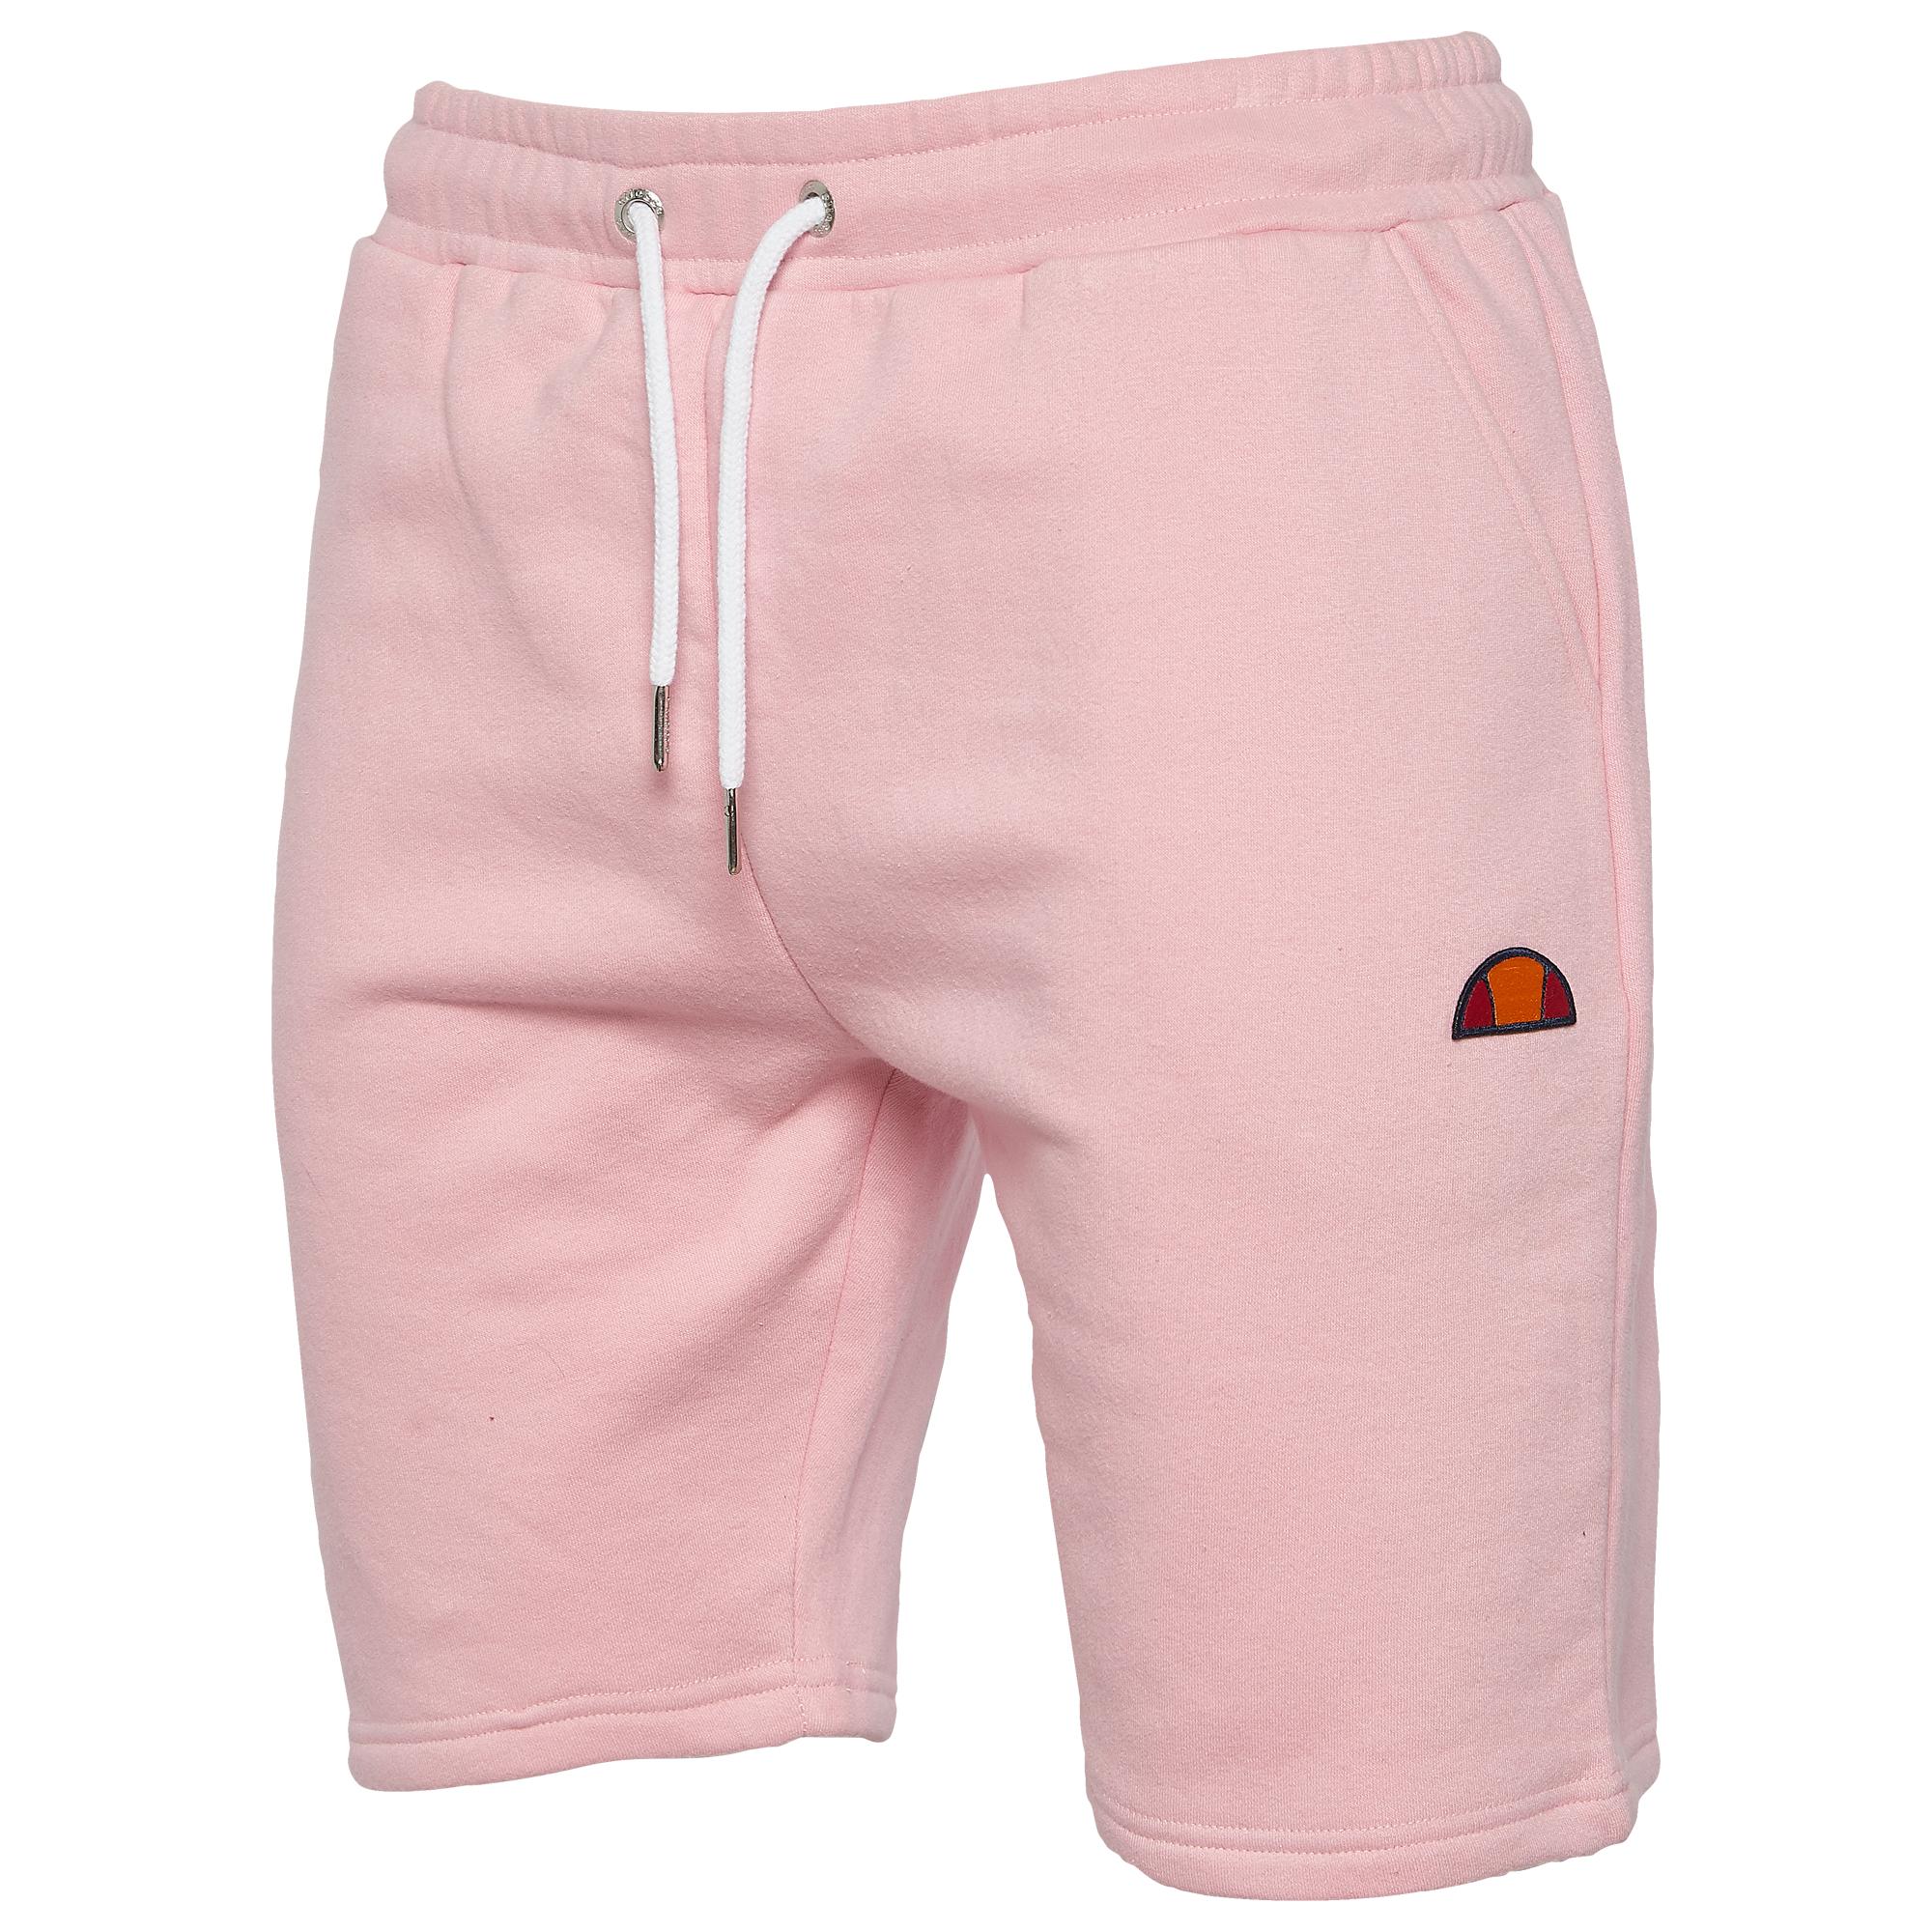 Ellesse Cotton Zola Shorts in Pink for 